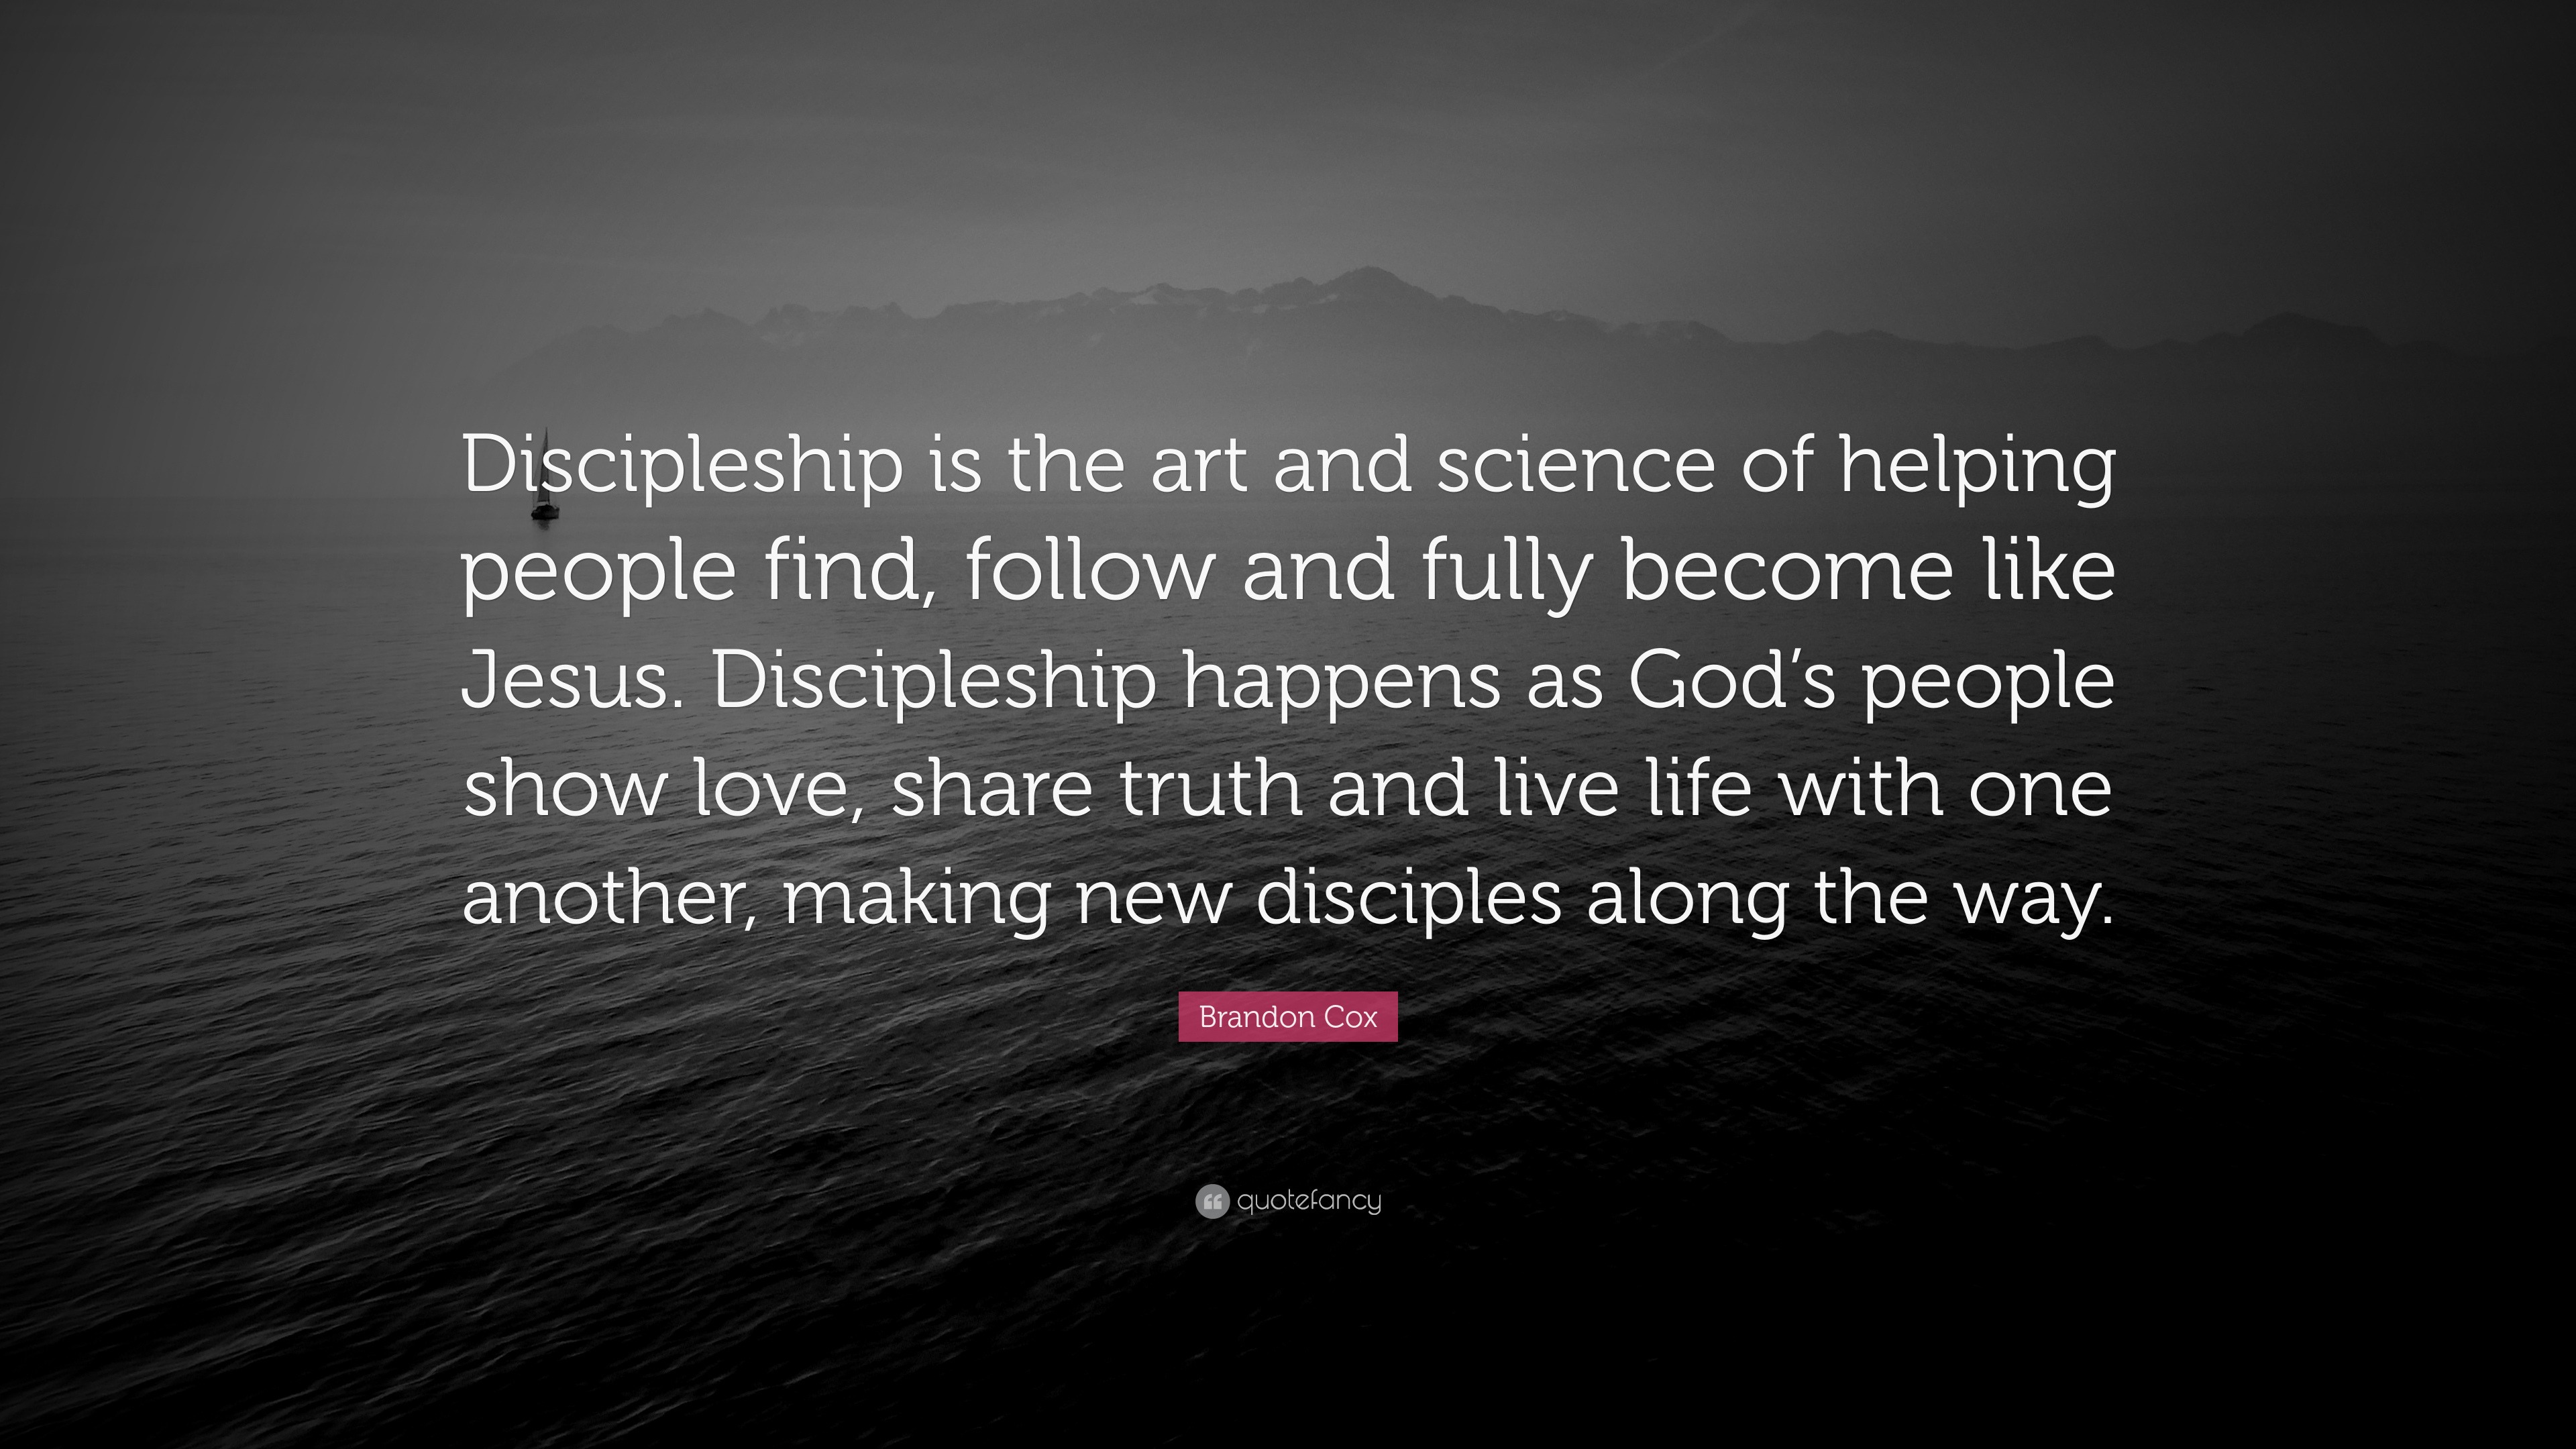 Brandon Cox Quote “Discipleship is the art and science of helping people find